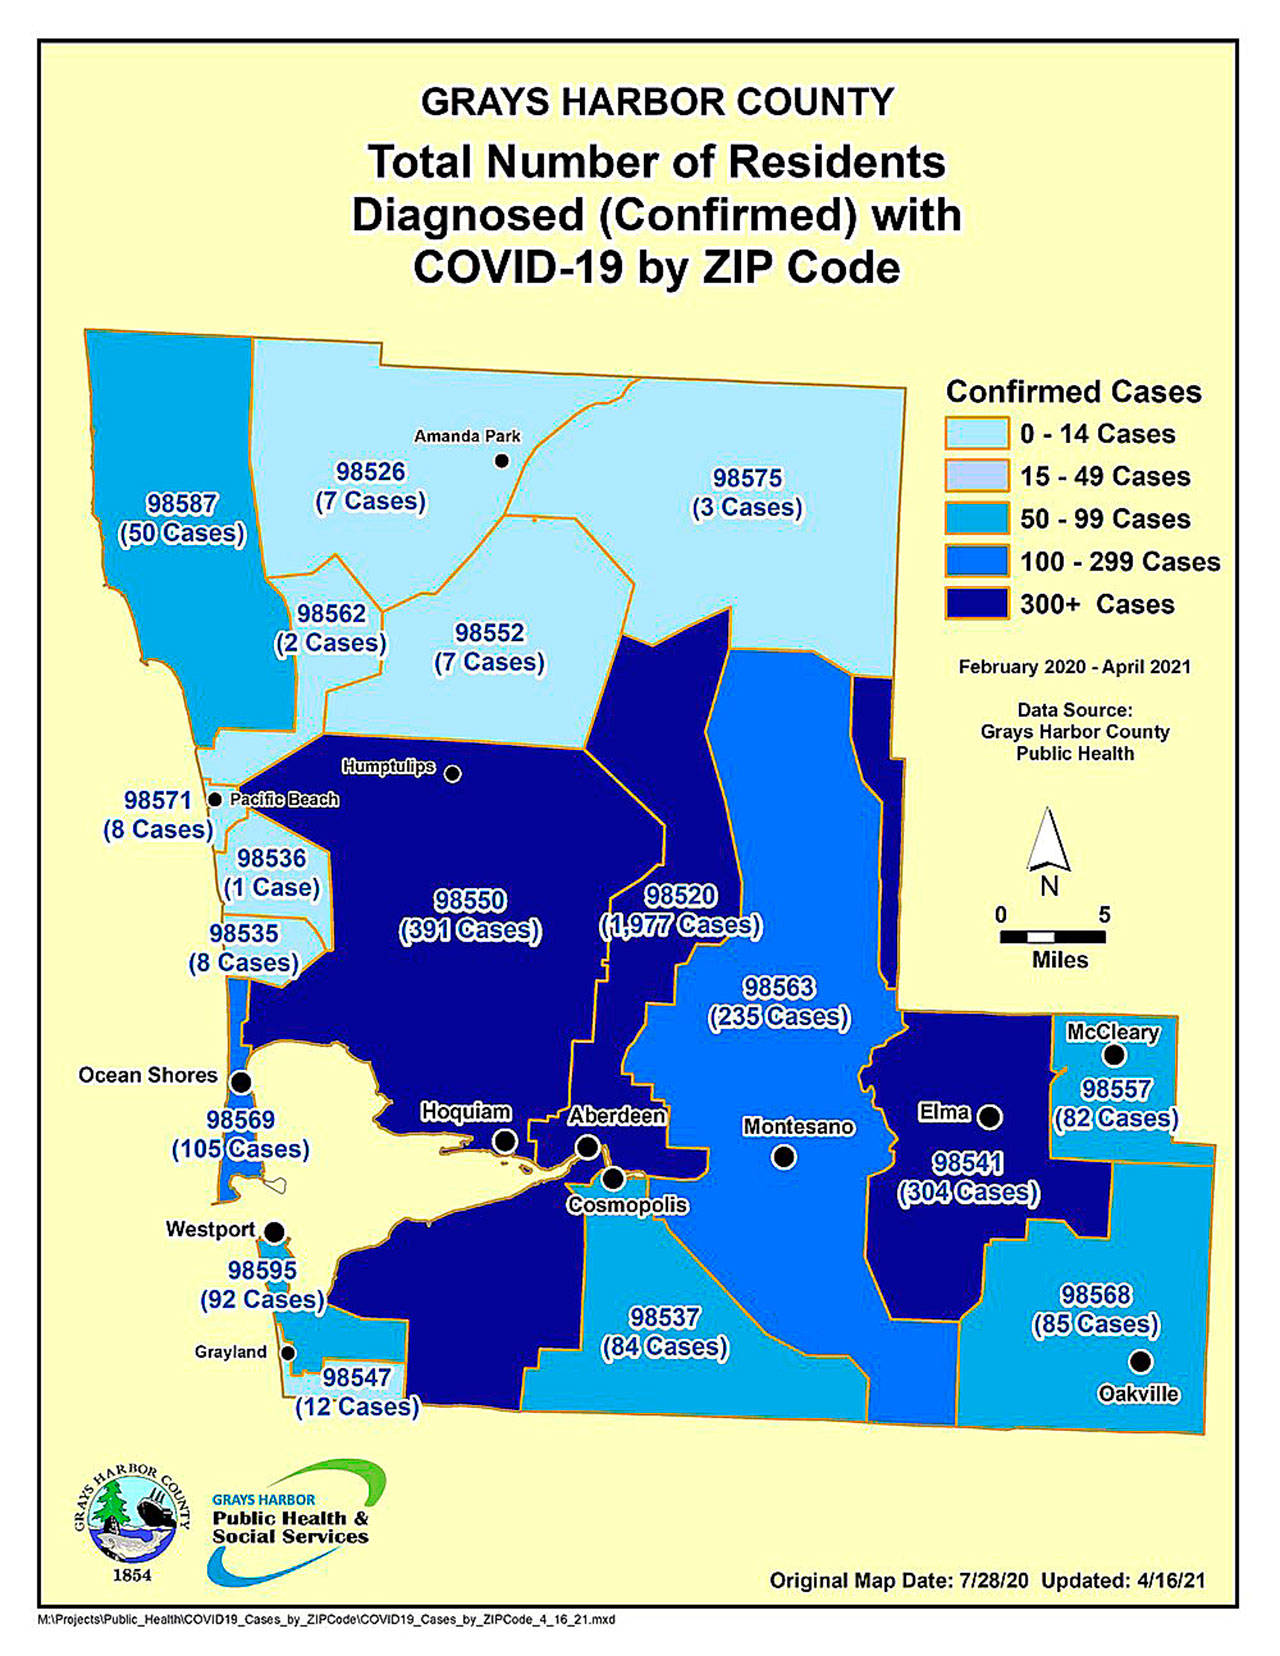 COURTESY GRAYS HARBOR COUNTY PUBLIC HEALTH 
Total COVID-19 cases by zip code in Grays Harbor County, updated Friday.